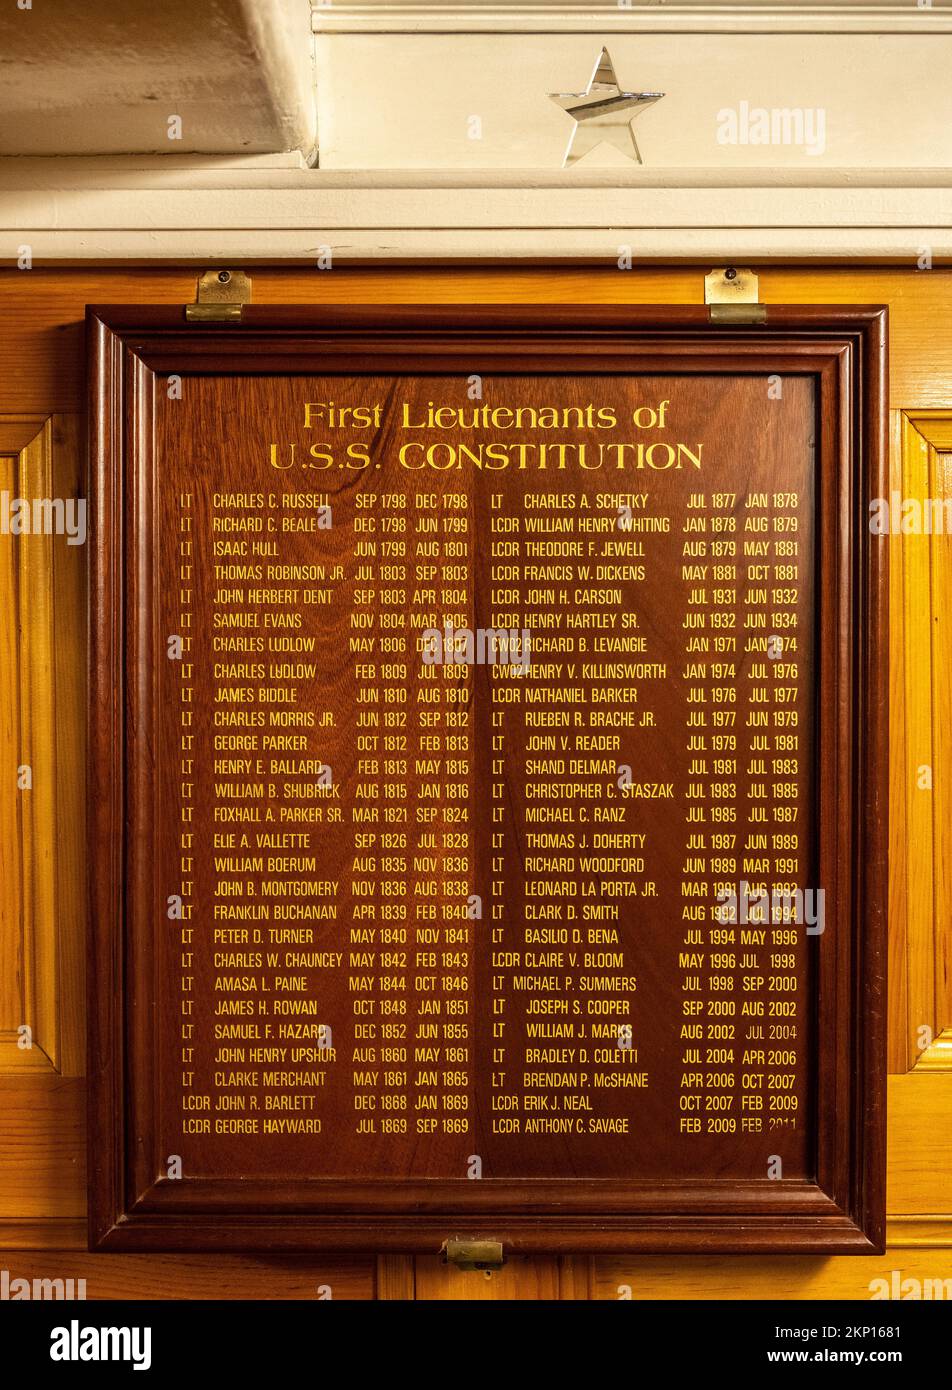 list of first lieutenants on the USS Constitution from 1798 to 2011 Stock Photo